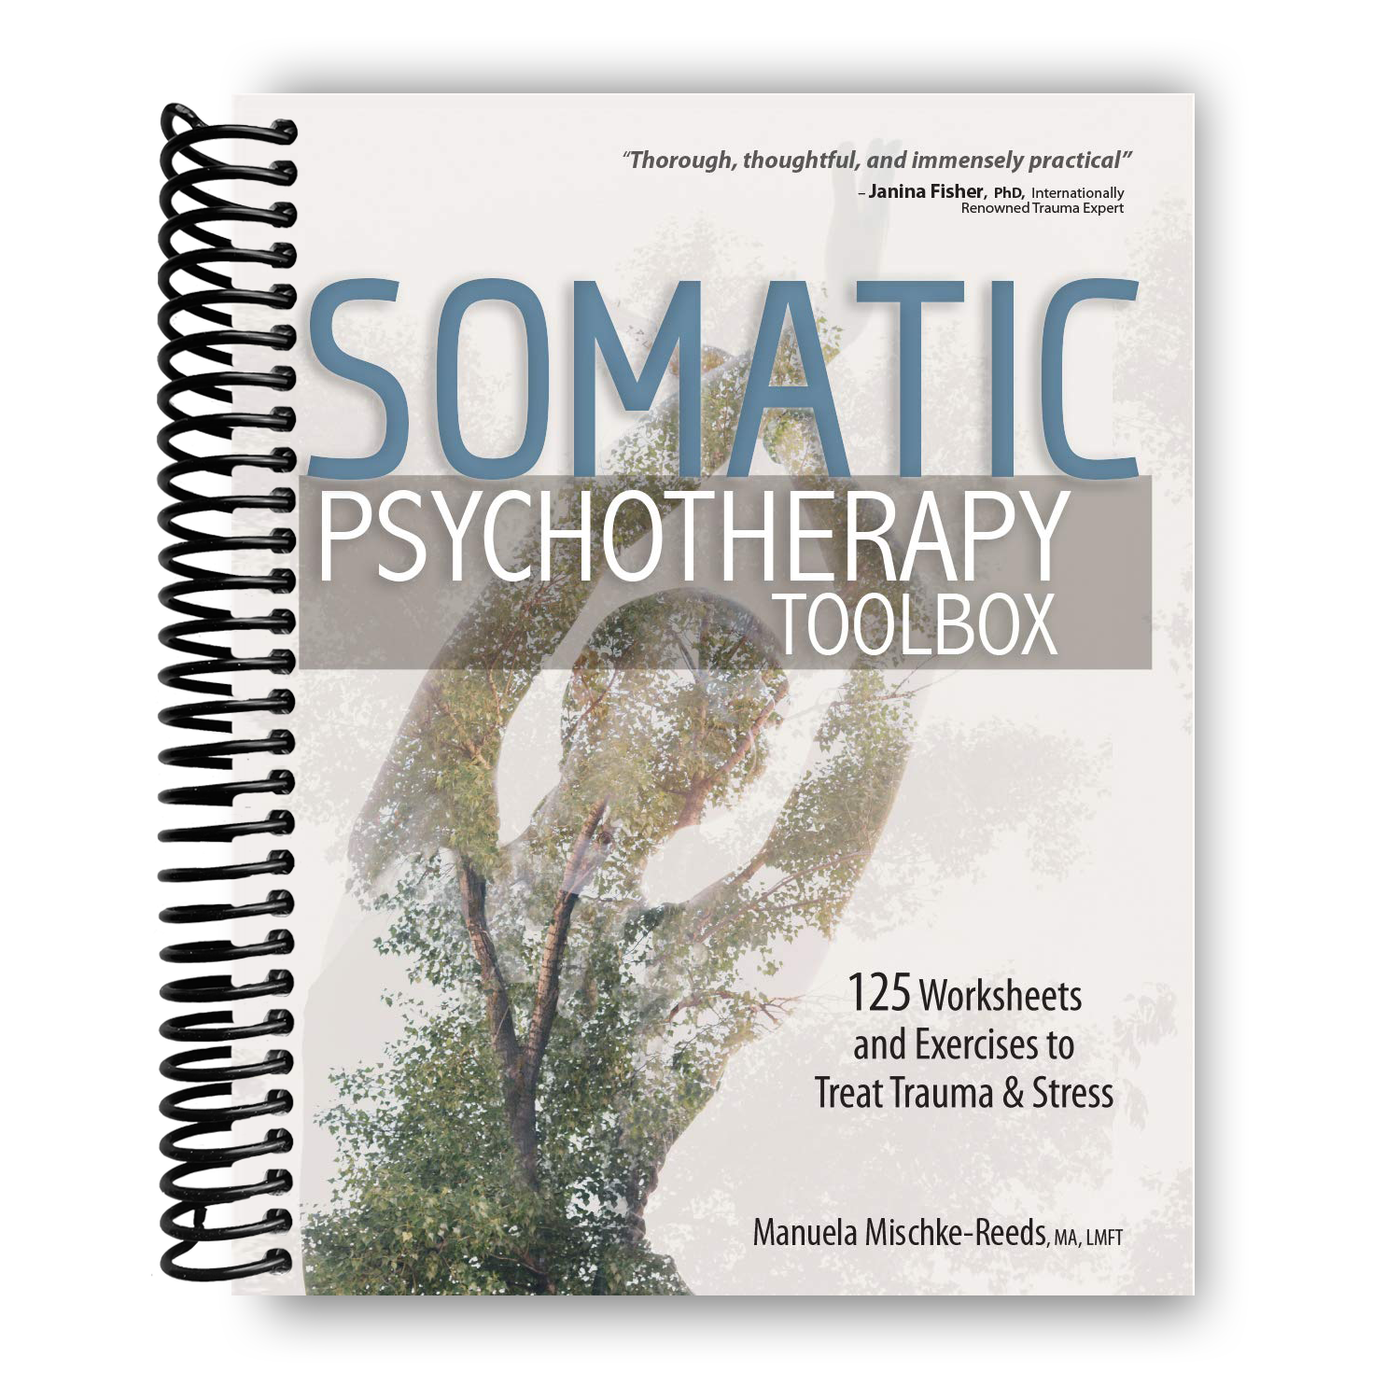 Somatic Psychotherapy Toolbox: 125 Worksheets and Exercises for Trauma & Stress(Spiral Bound)